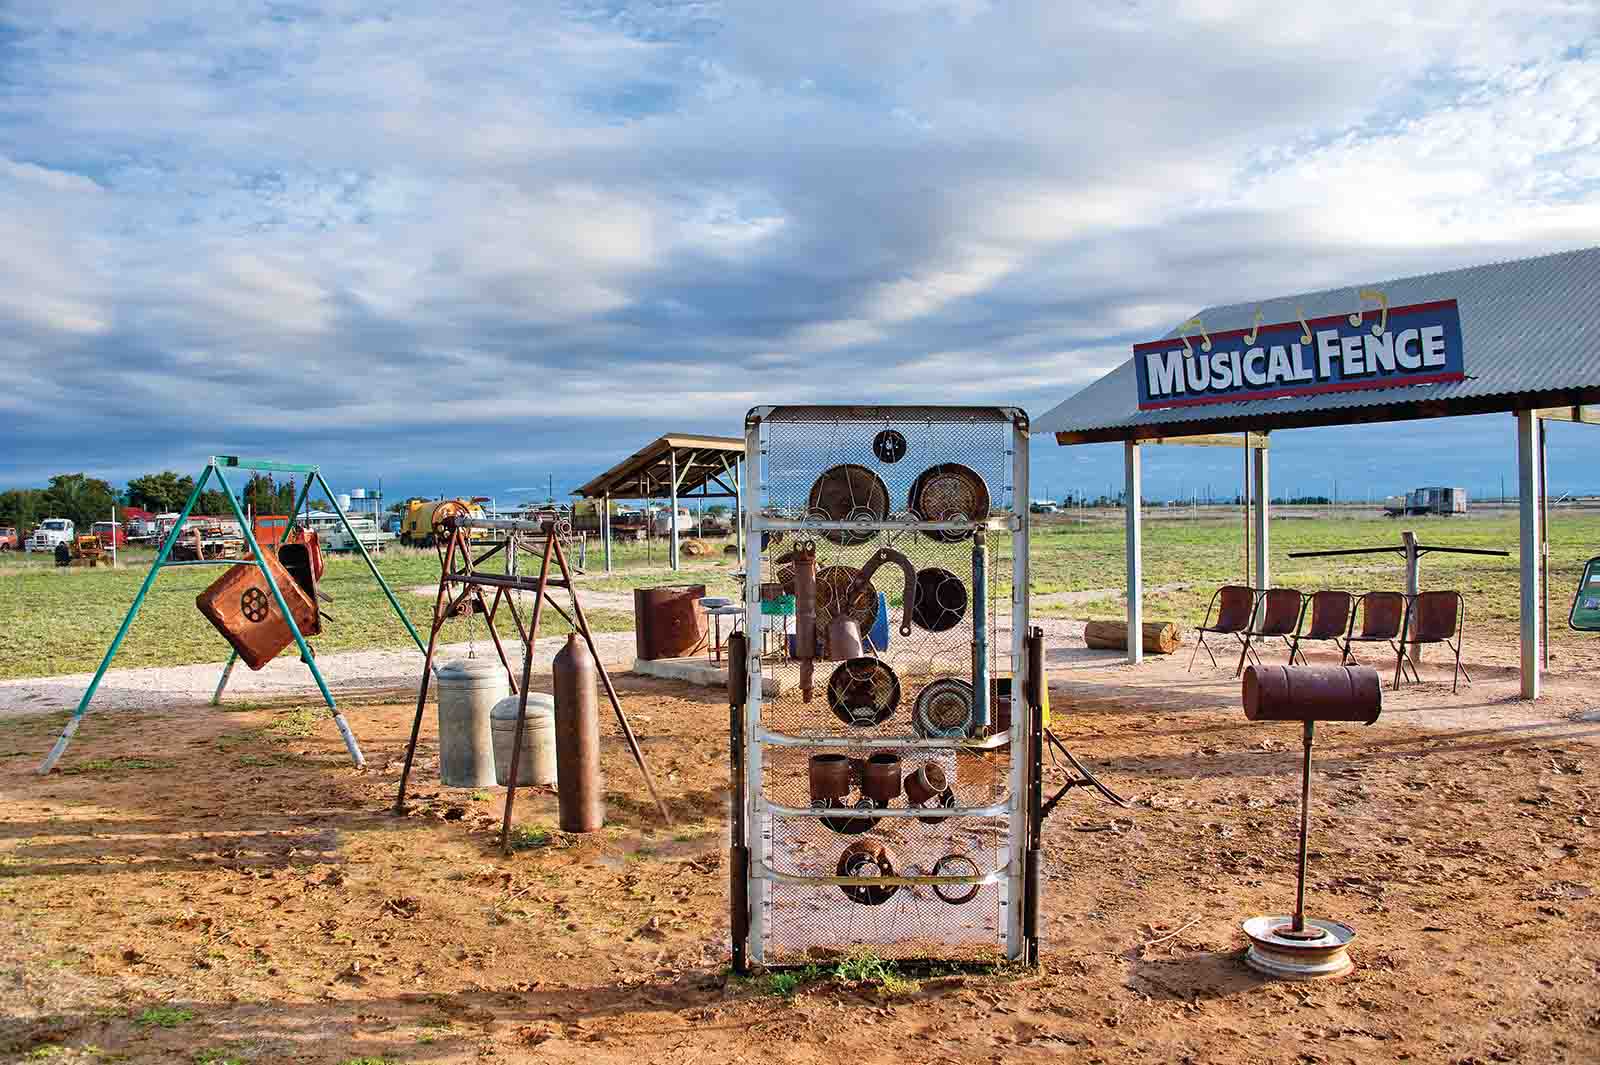 Musical Fence, Winton | Everything you need to know about Vision Splendid Outback Film Festival